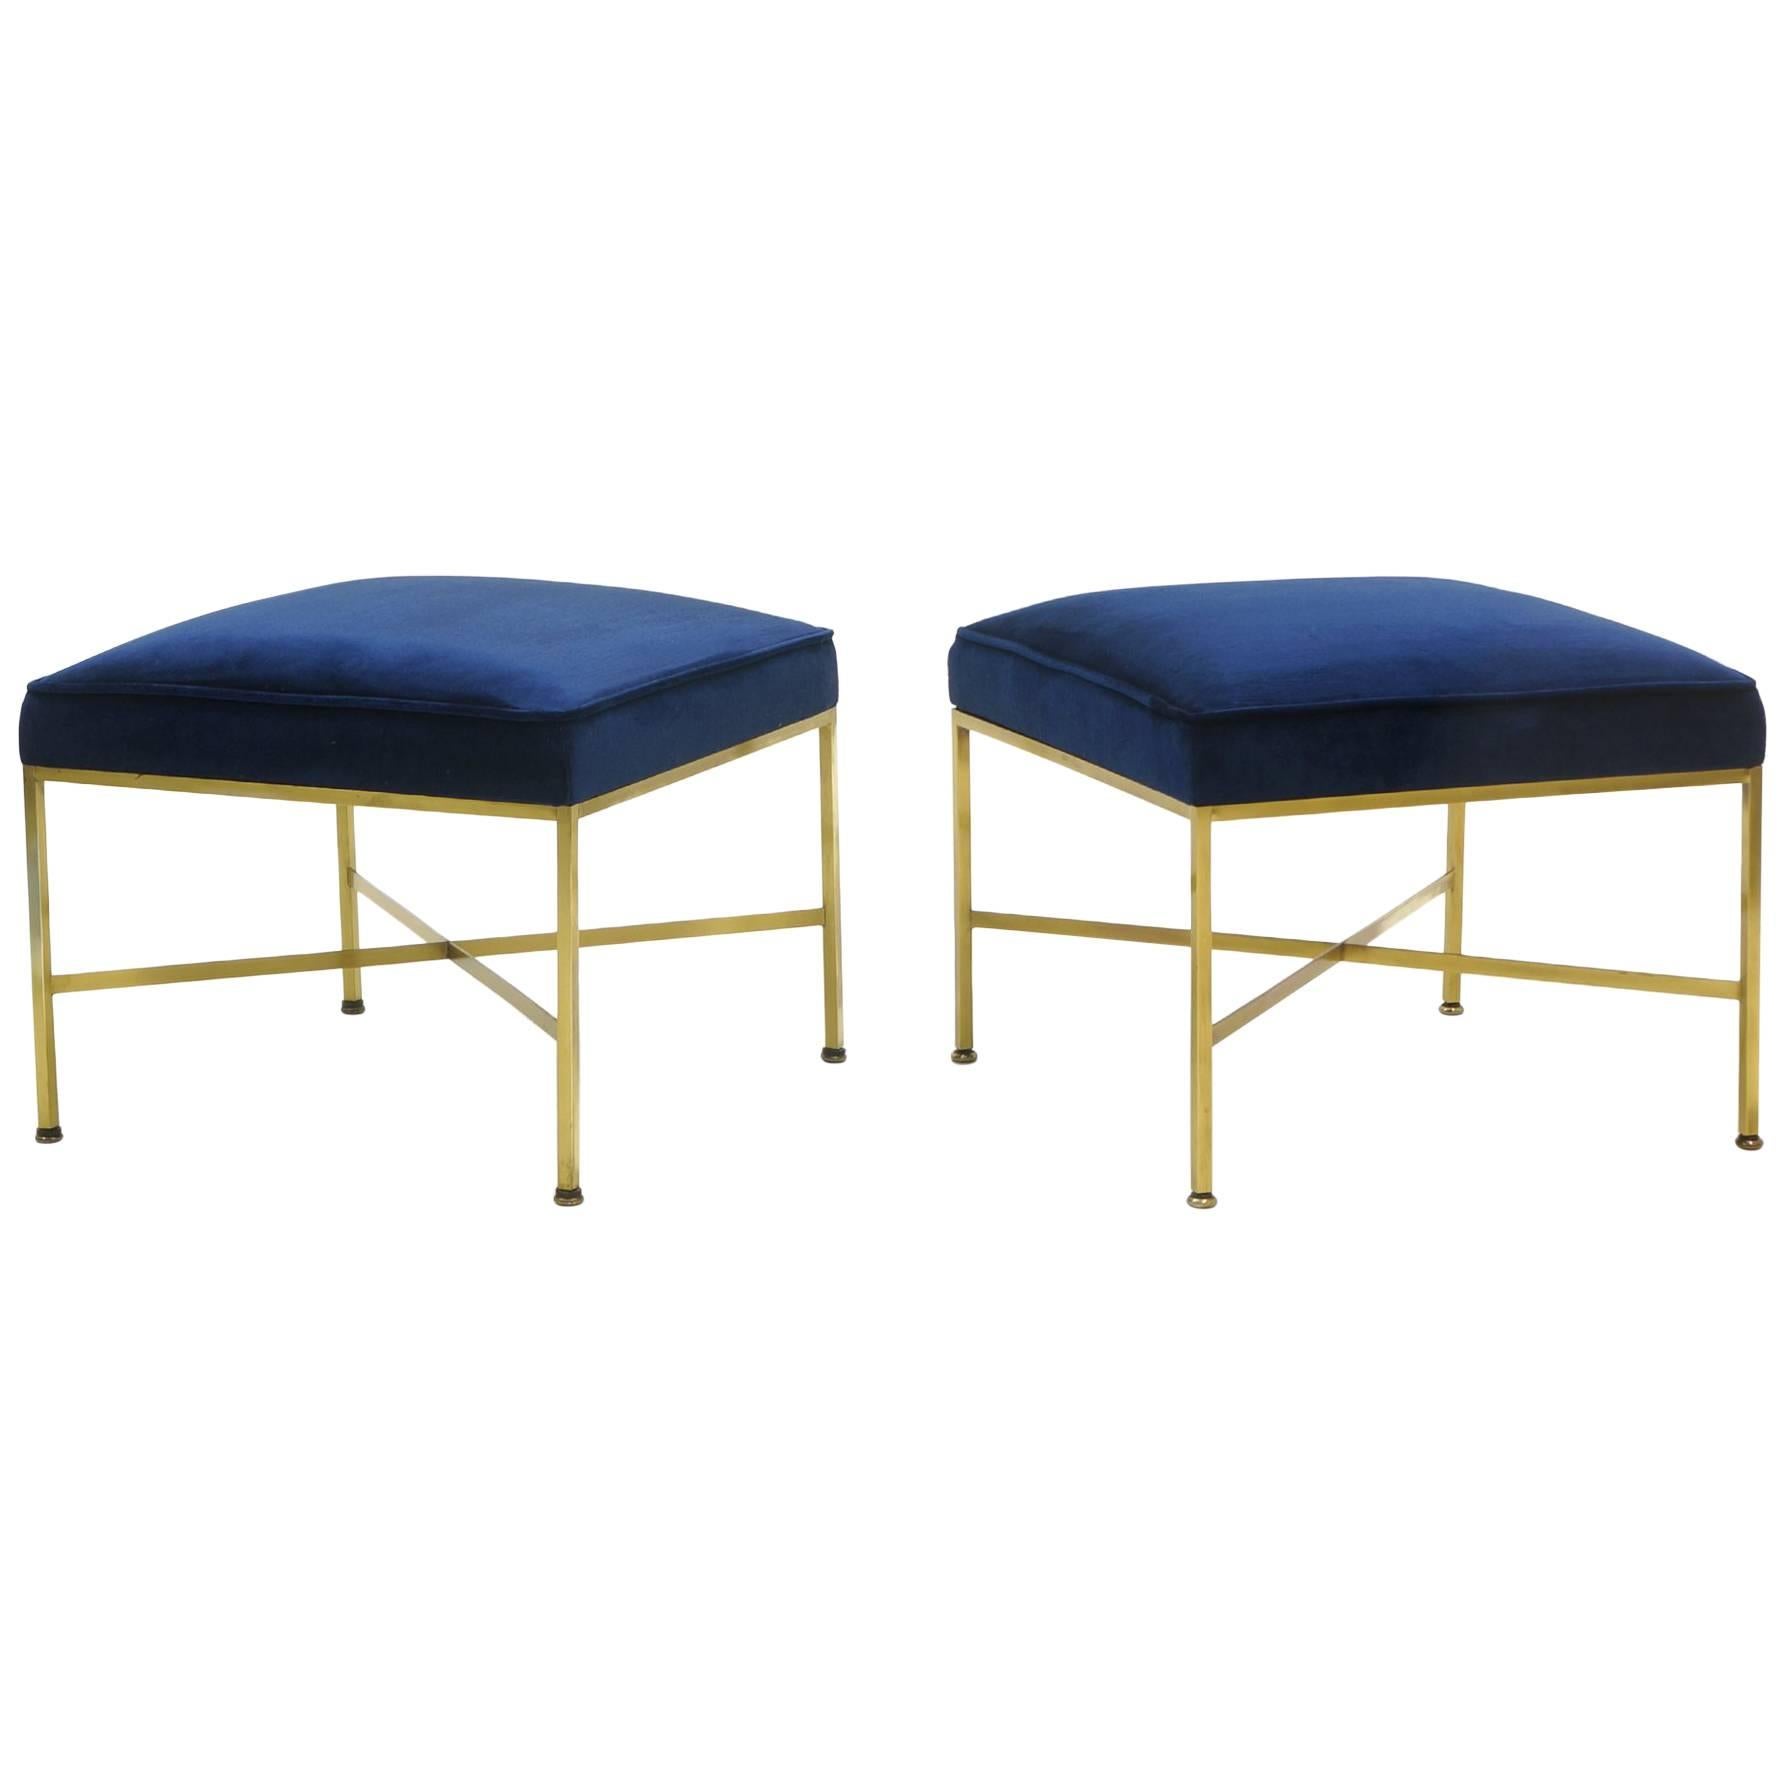 Pair of Paul McCobb Stools Solid Brass Frames and Cross Stretchers Excellent